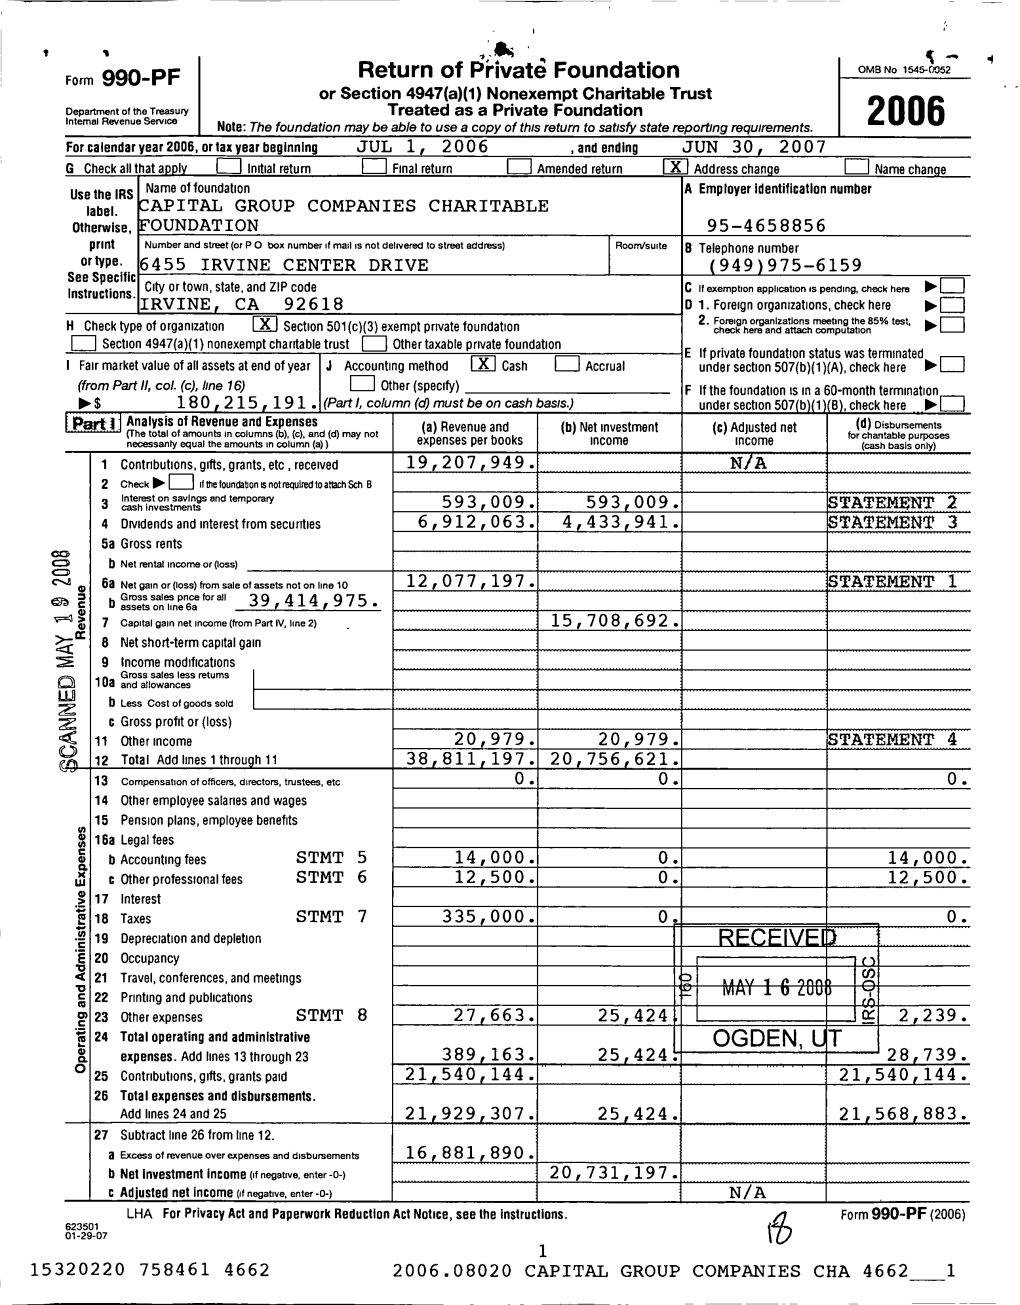 Form 990-PF Return of Private Foundation RECEI VE MAY 16 OGDEN T